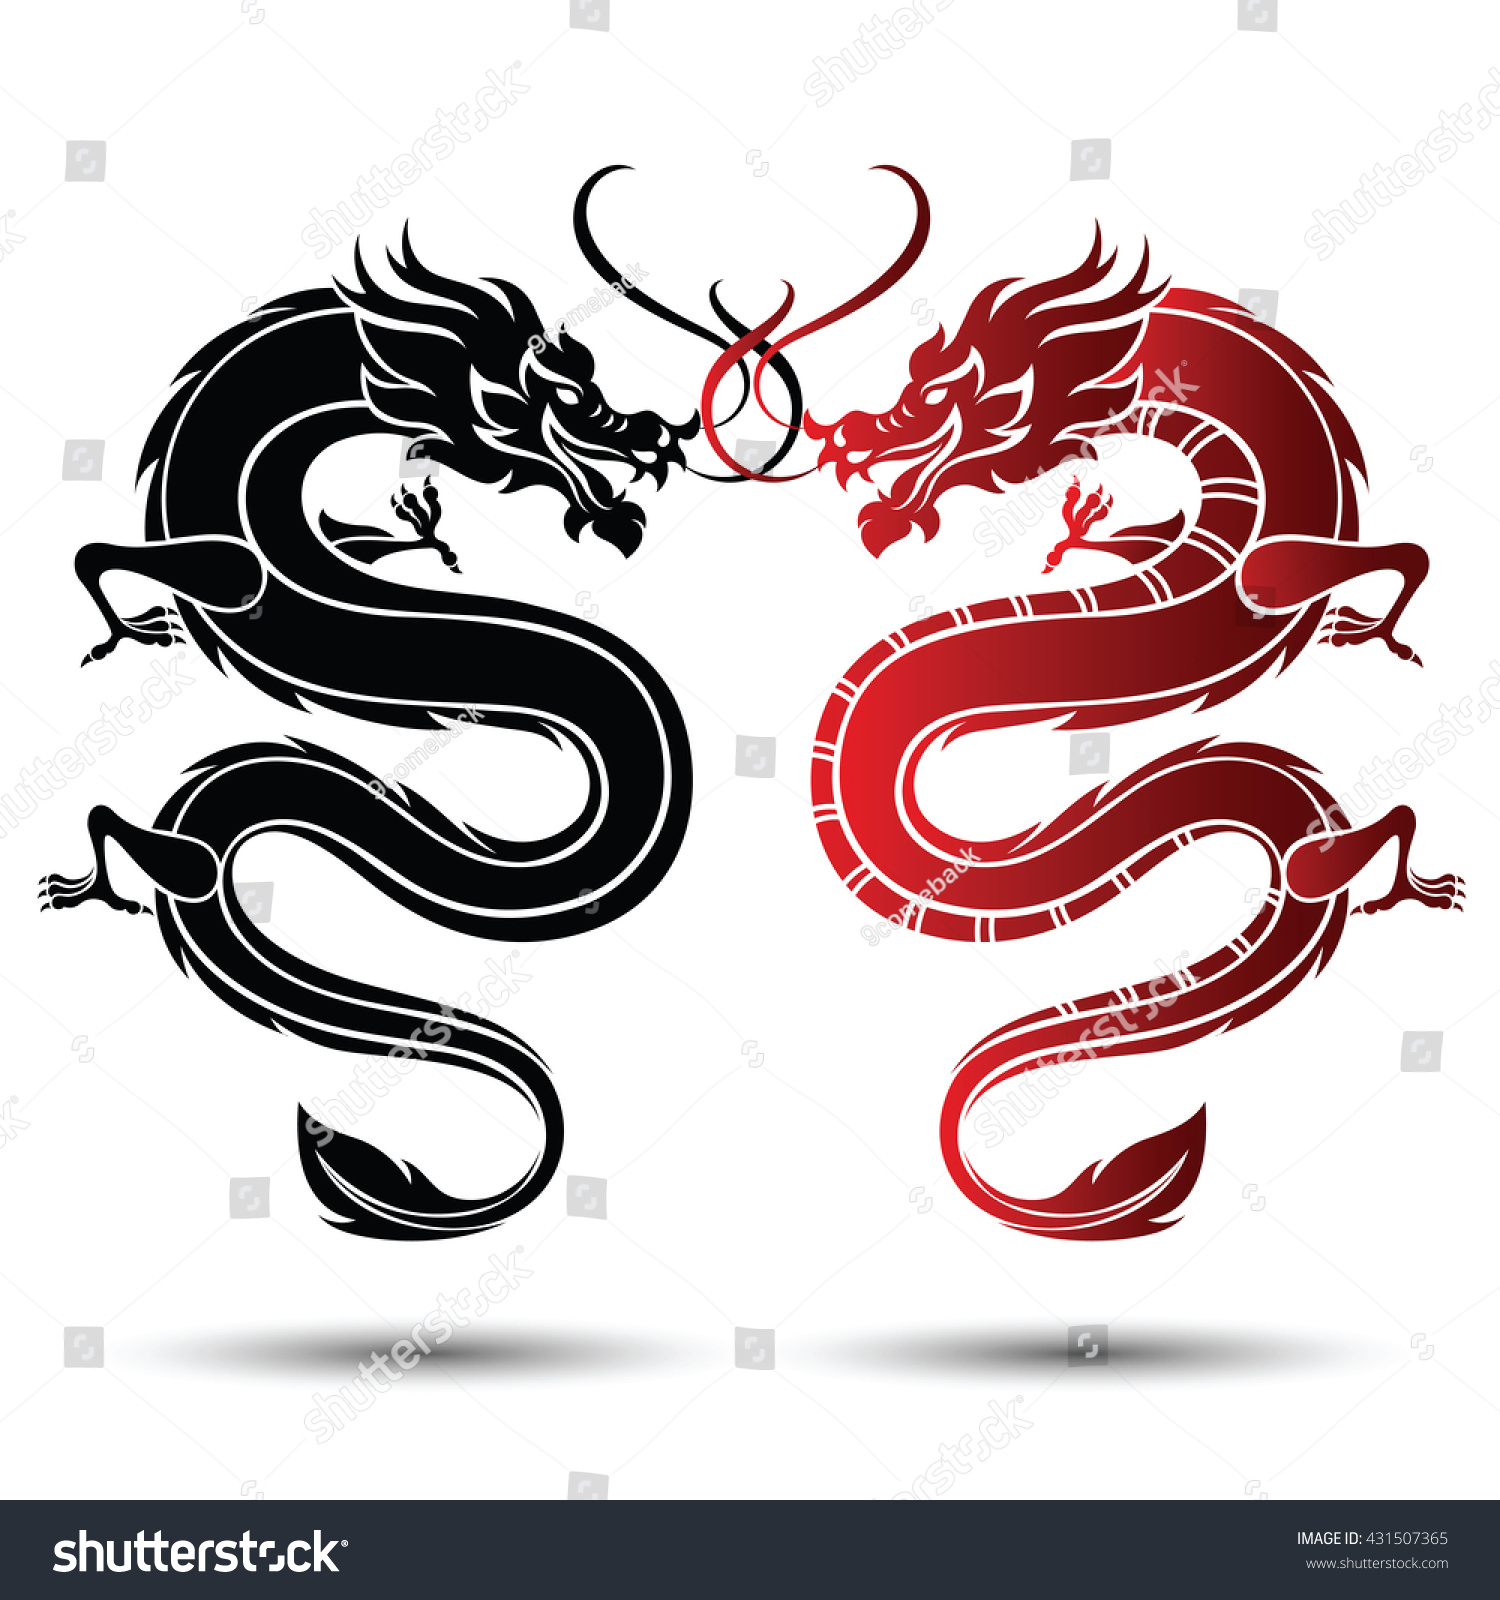 Illustration Traditional Chinese Dragon Vector Illustration Stock Vector Royalty Free